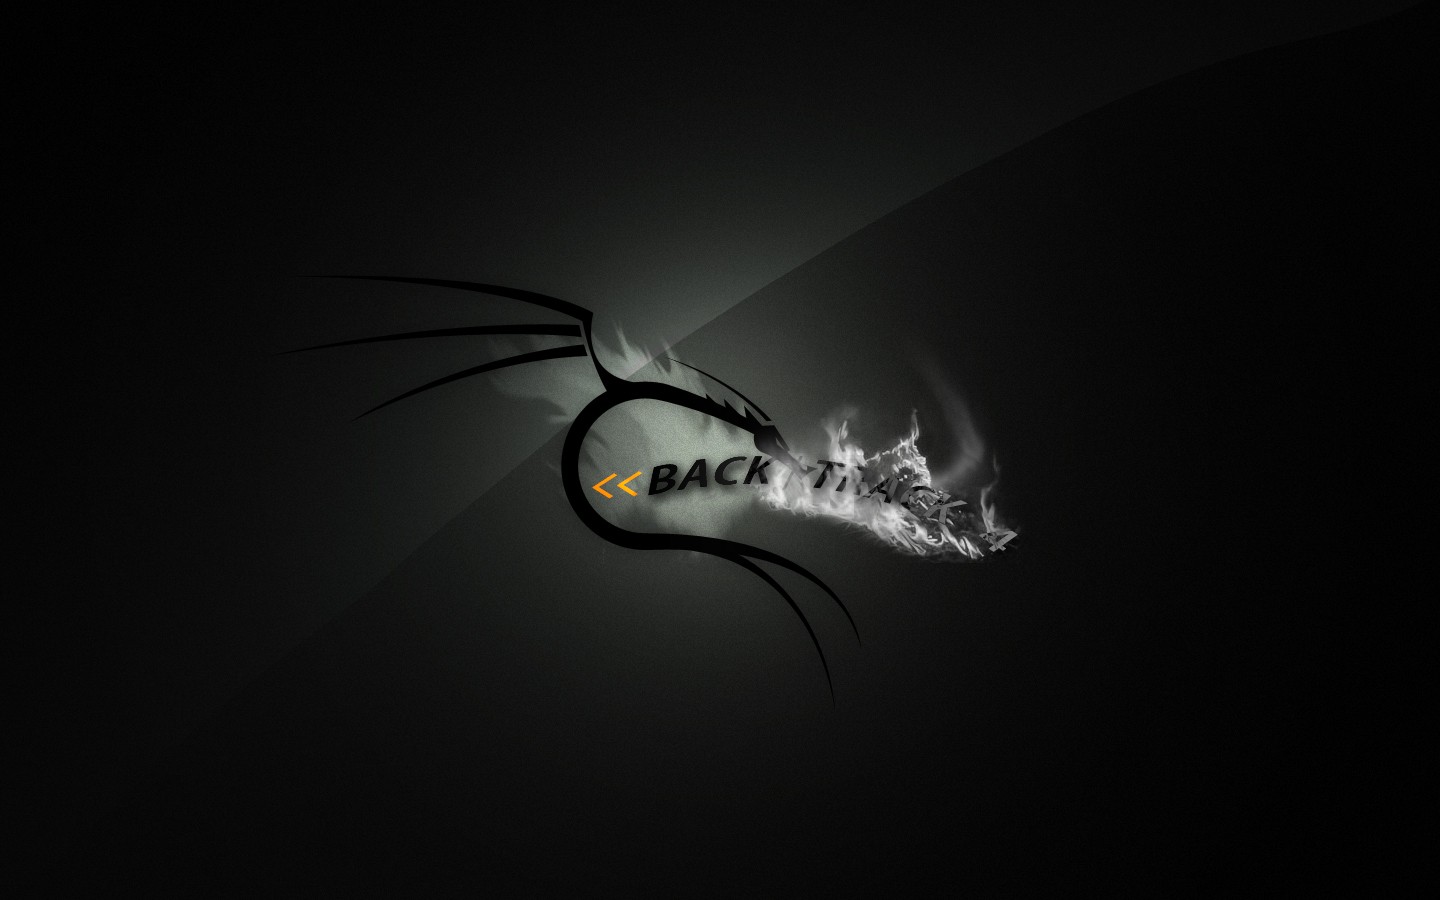 backtrack linux best widescreen background awesome HD Wallpaper of 1440x900